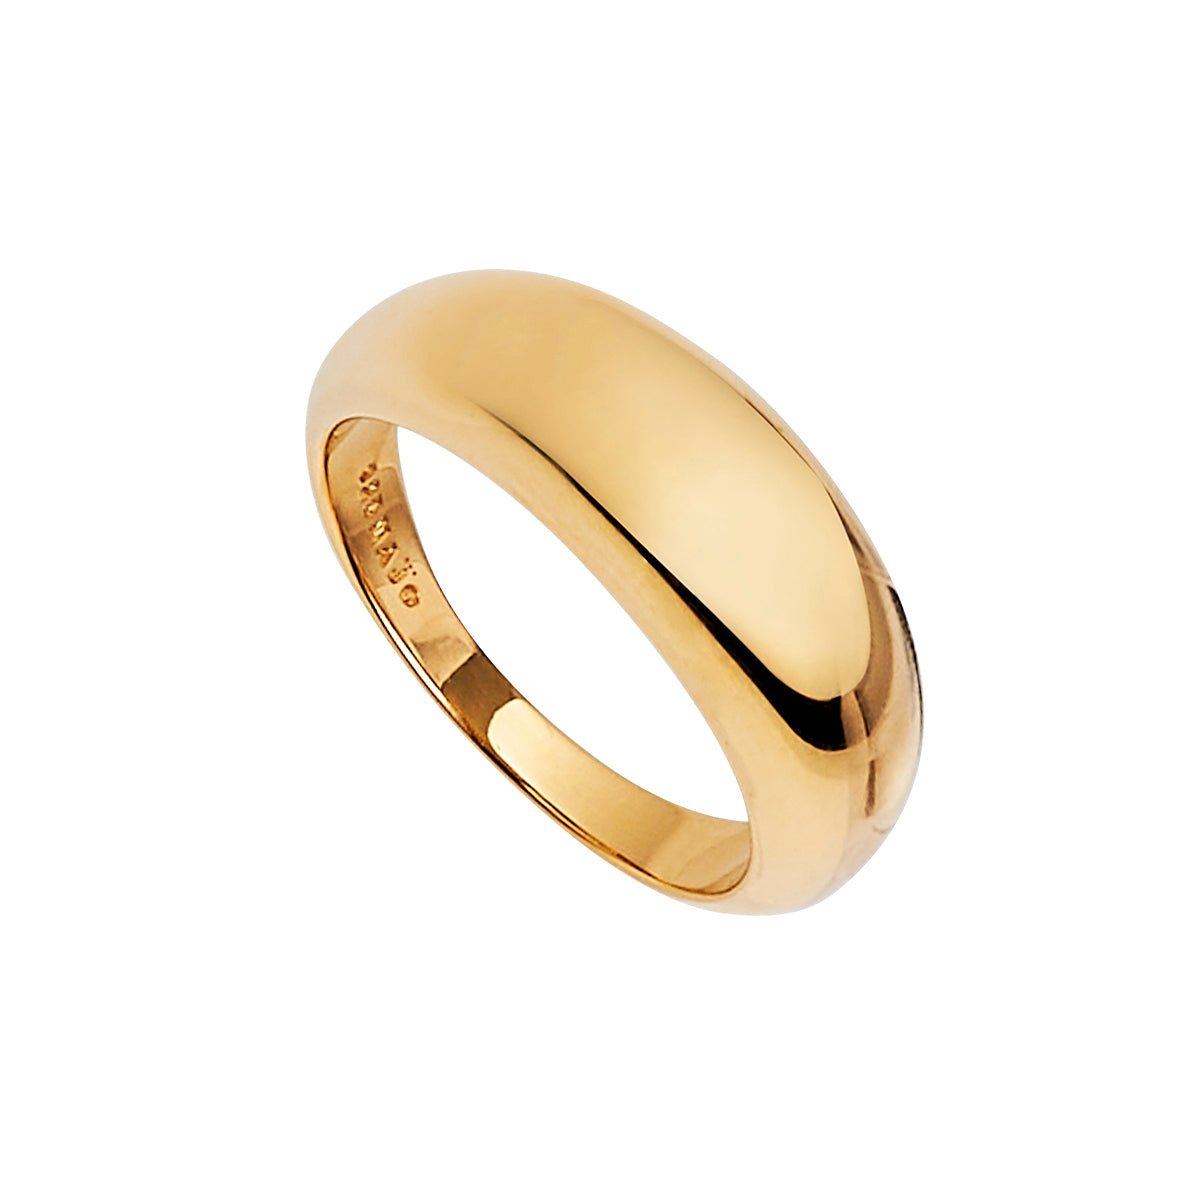 Najo Sublime Yellow Gold Ring SizeT1/2